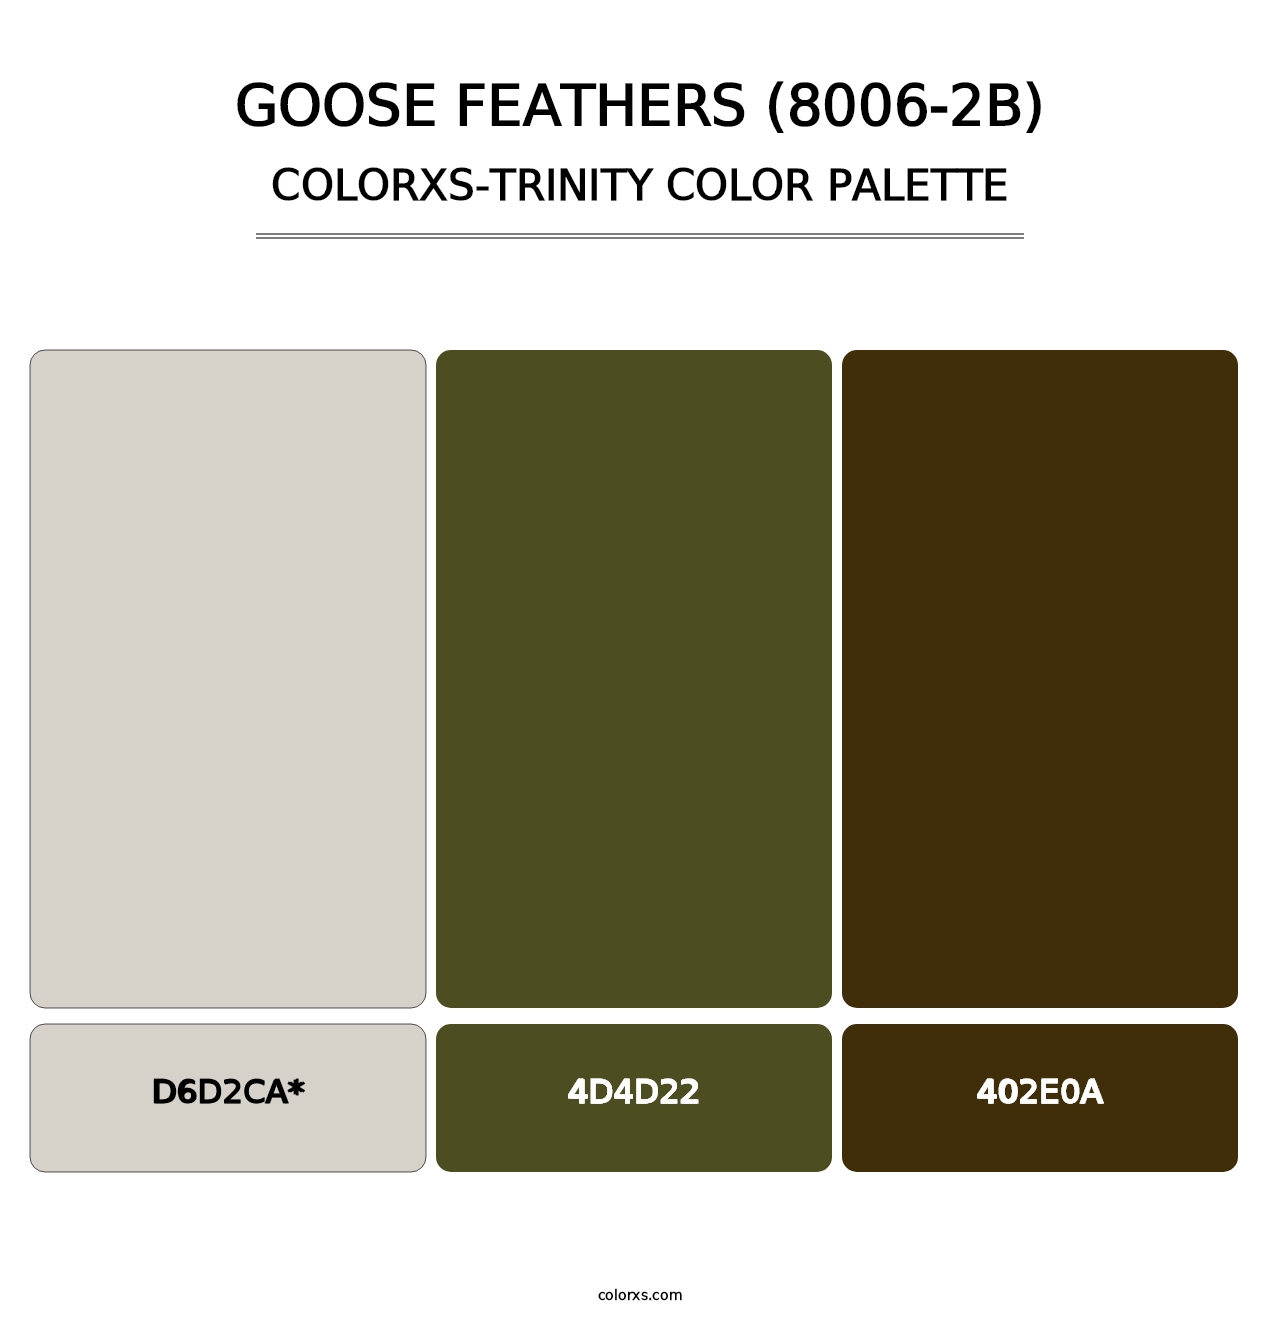 Goose Feathers (8006-2B) - Colorxs Trinity Palette